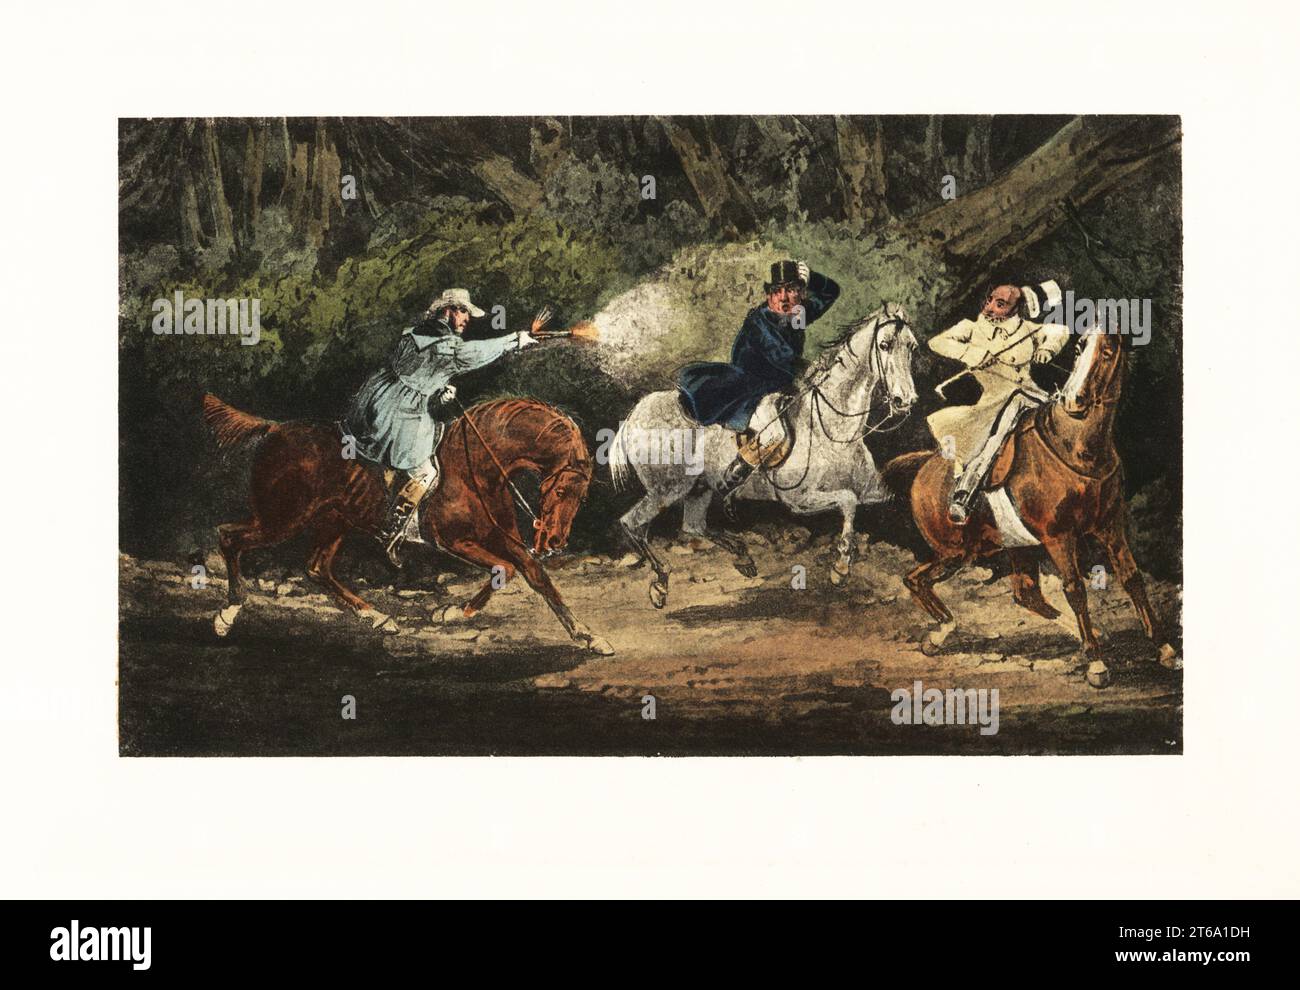 Victorian gentlemen held up by a highwayman in a smock coat.. Mytton fires blanks from a pistol at his guests on a road at night for a prank. Stand and deliver! Chromolithographic facsimile of an illustration by Henry Thomas Alken from Memoirs of the Life of the Late John Mytton by Nimrod aka Charles James Apperley, Kegan Paul, London, 1900. Stock Photo